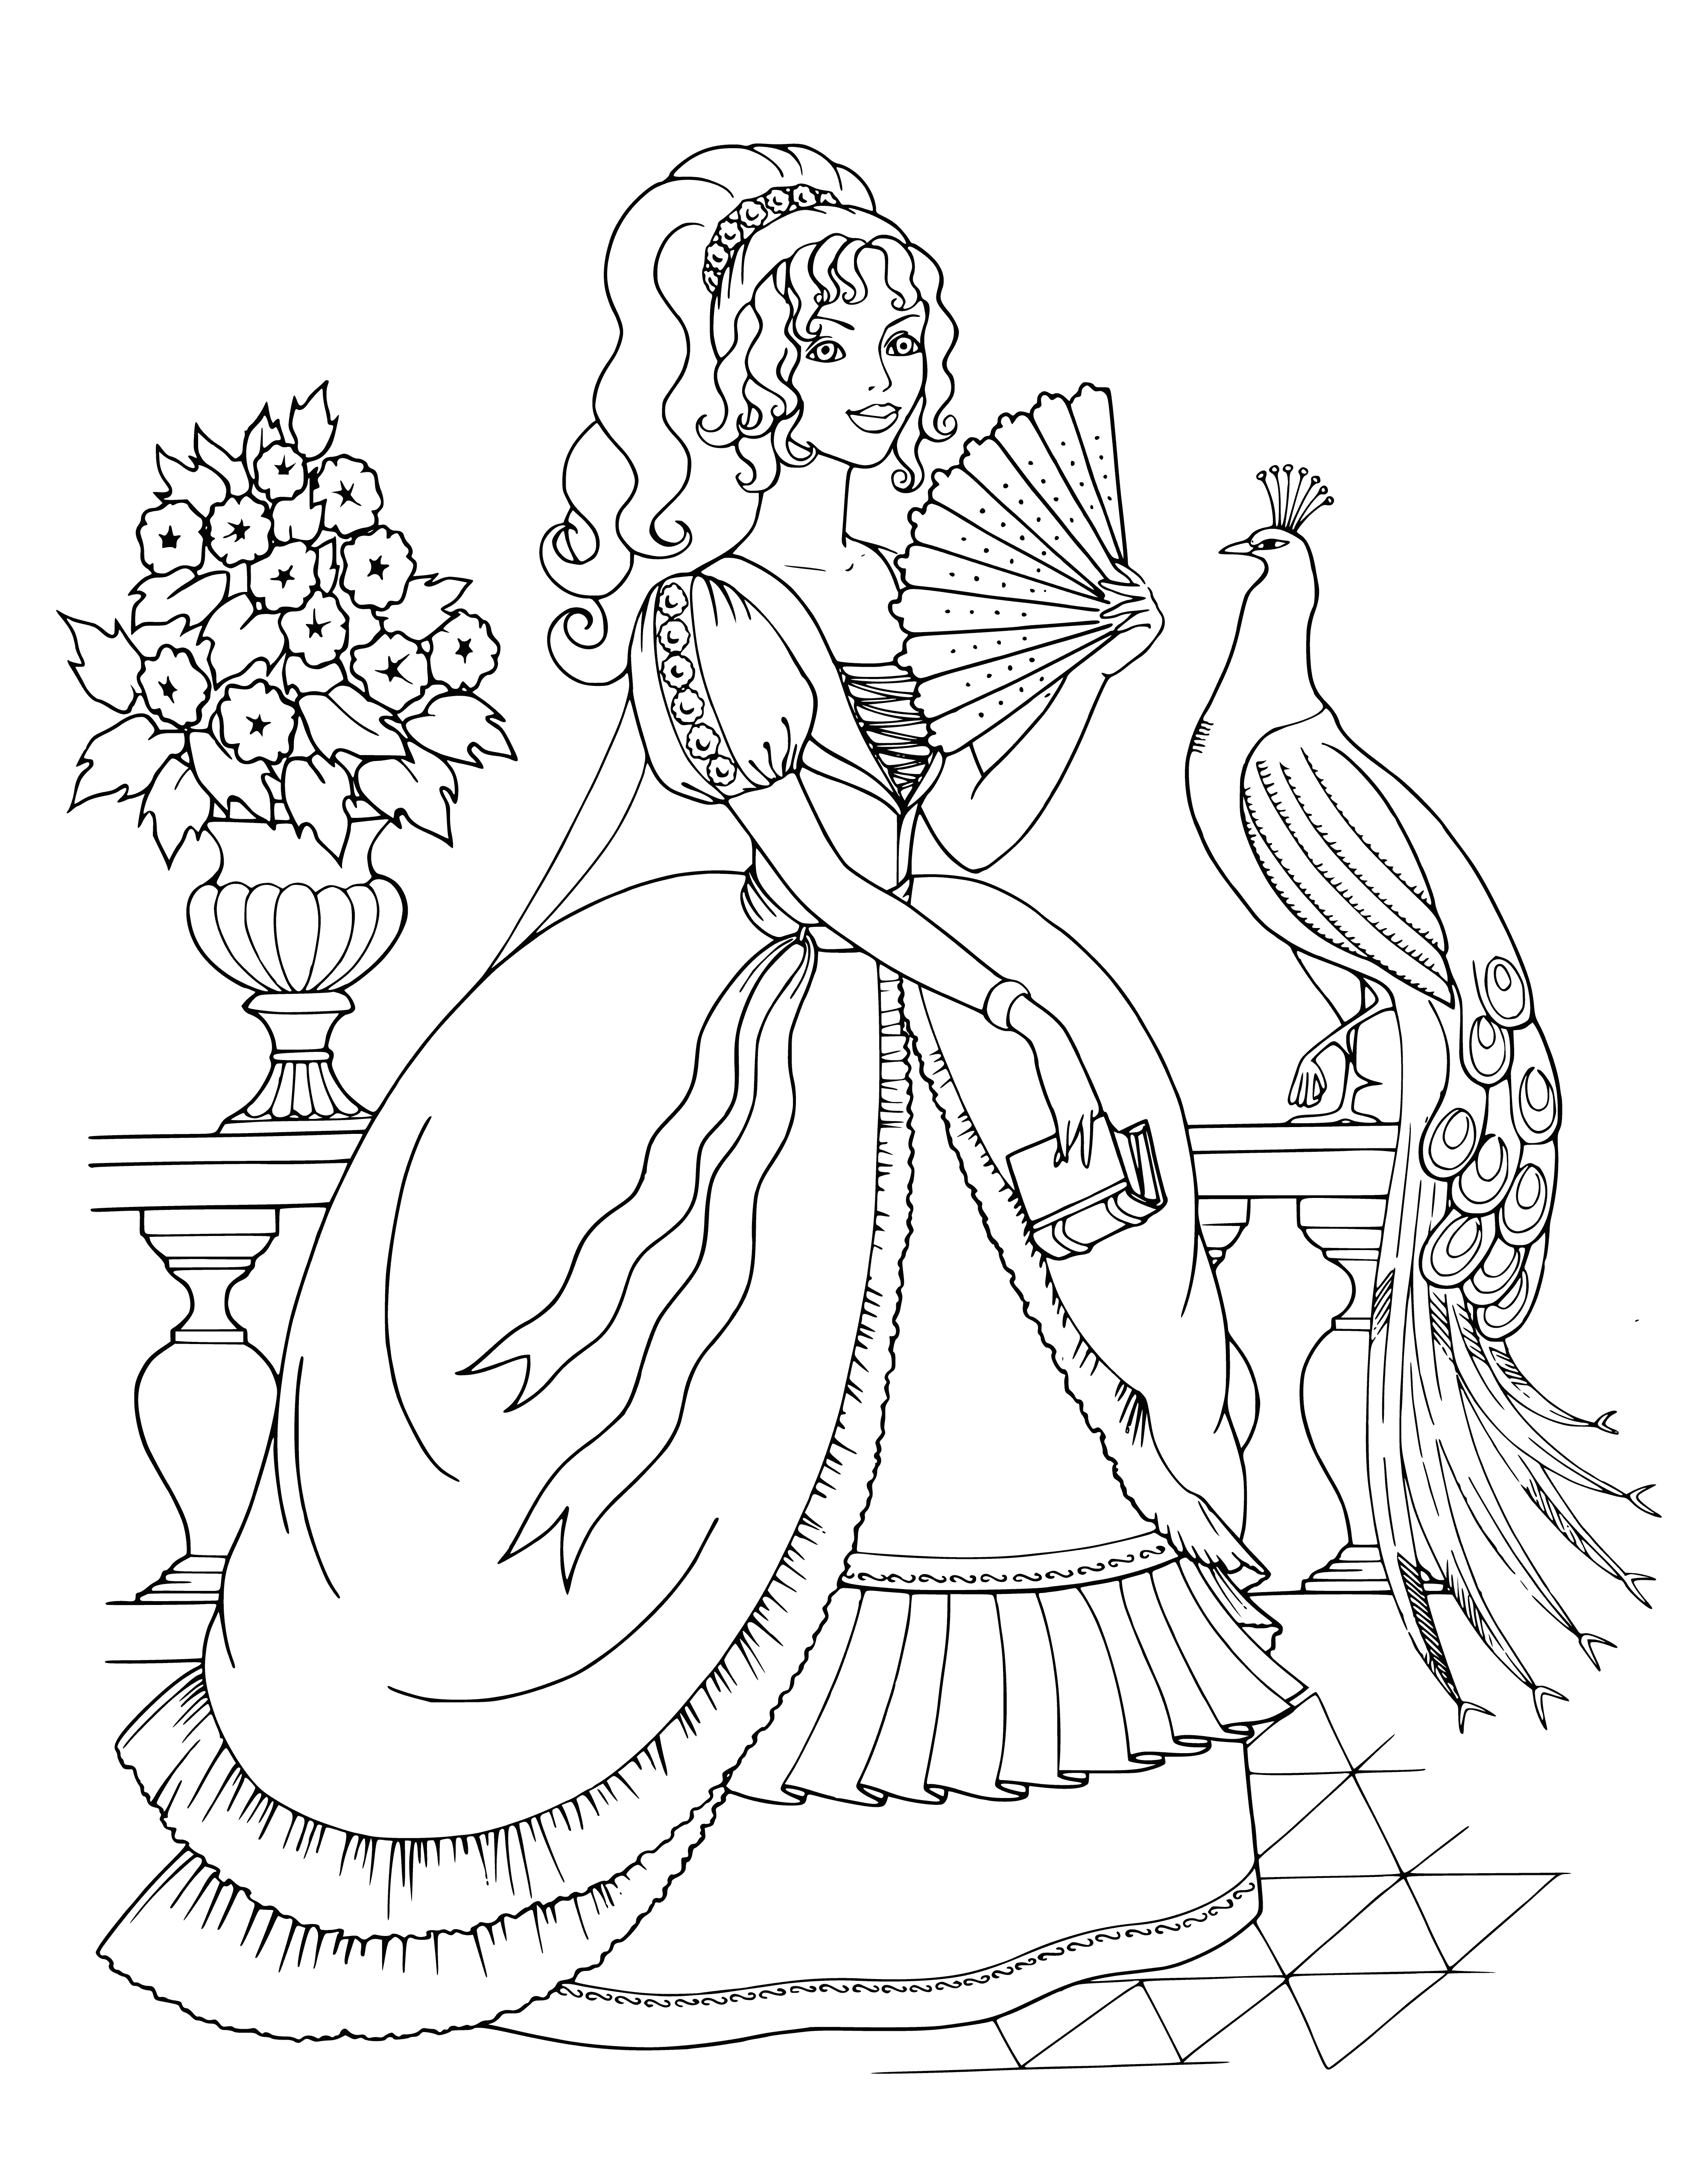 Princess and peacock coloring page